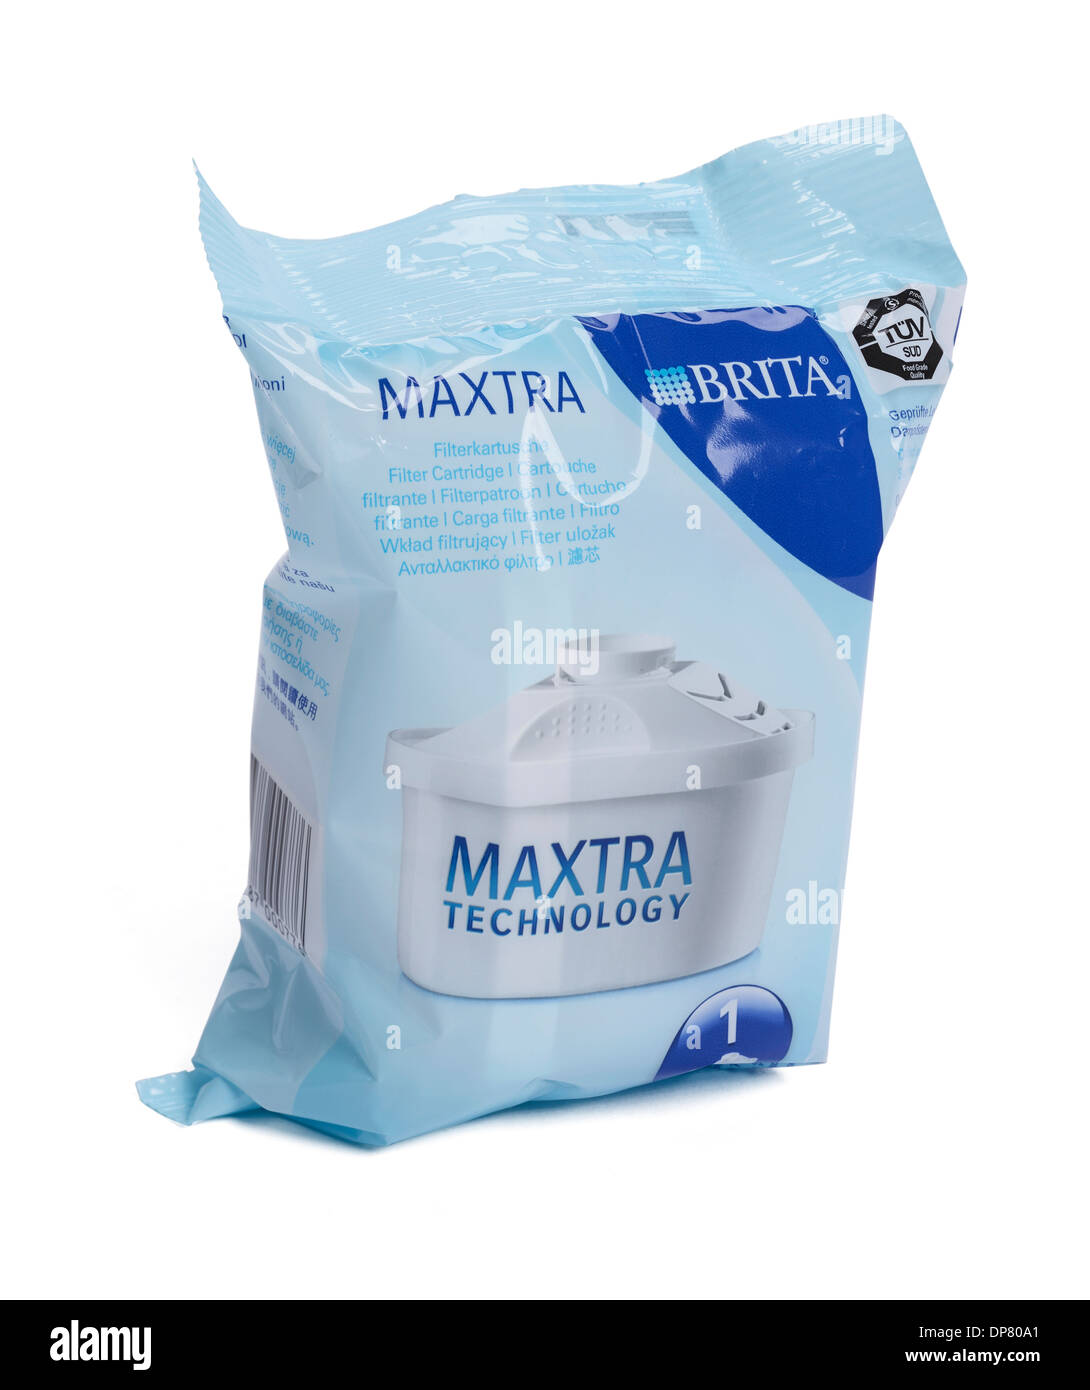 A Maxtra filter cartridge for use in a Brita water filter jug Stock Photo